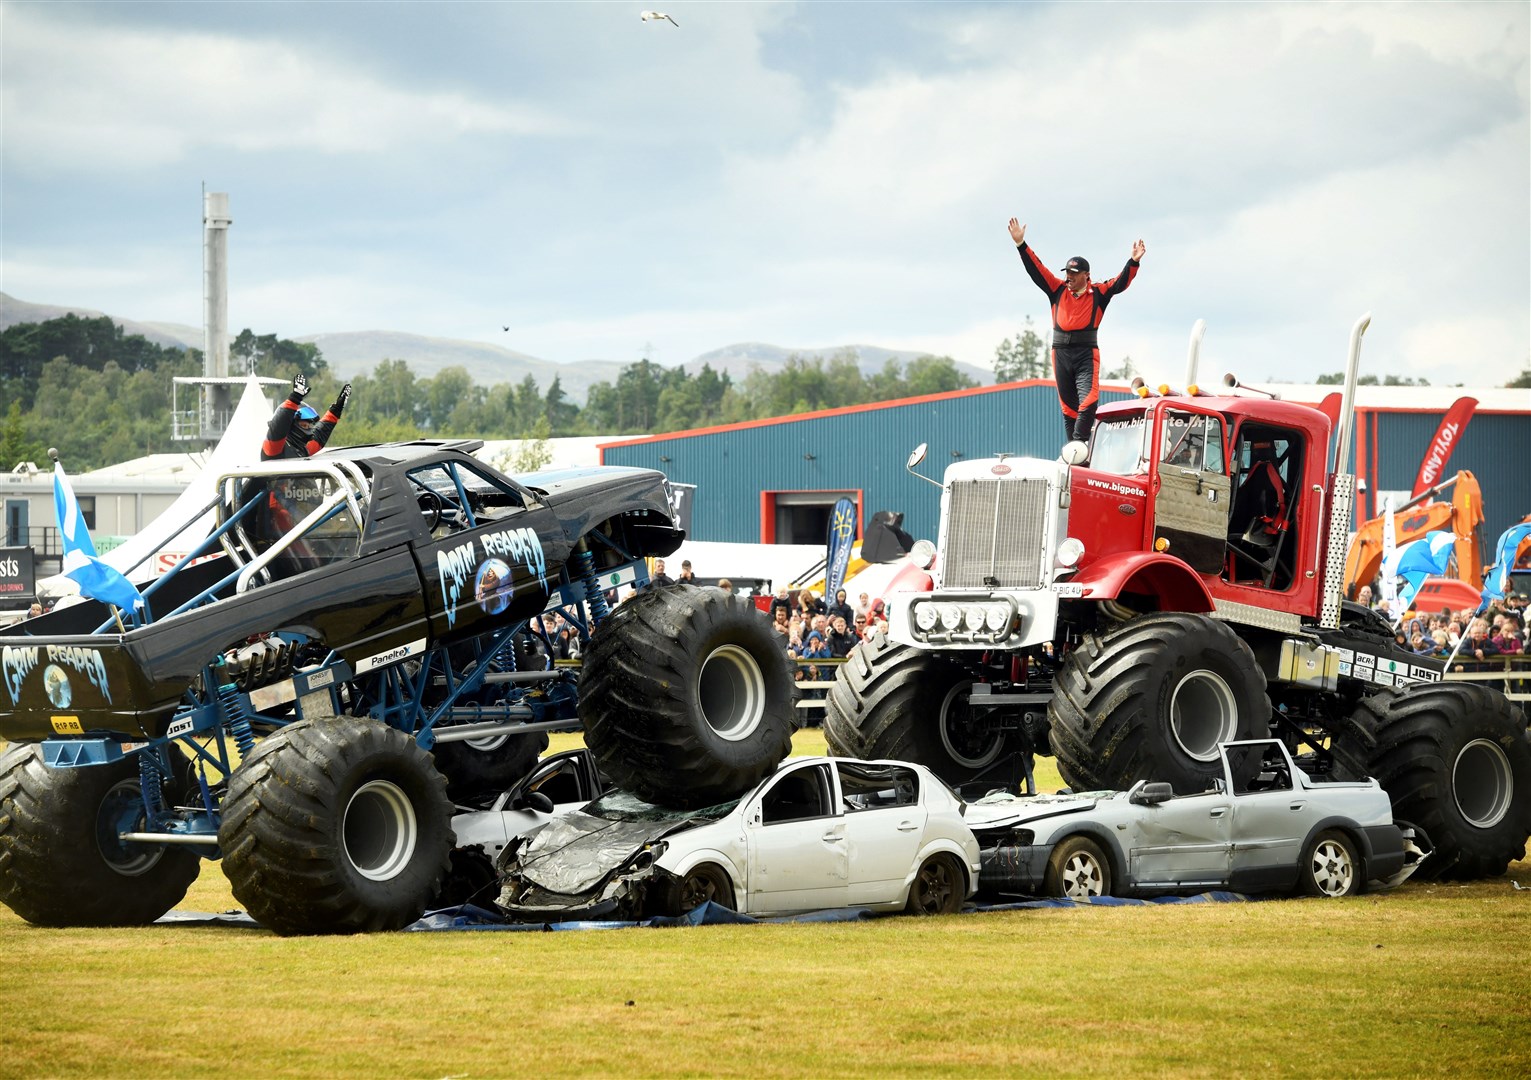 The Grim Reaper and Big Pete monster trucks. Picture: James Mackenzie.